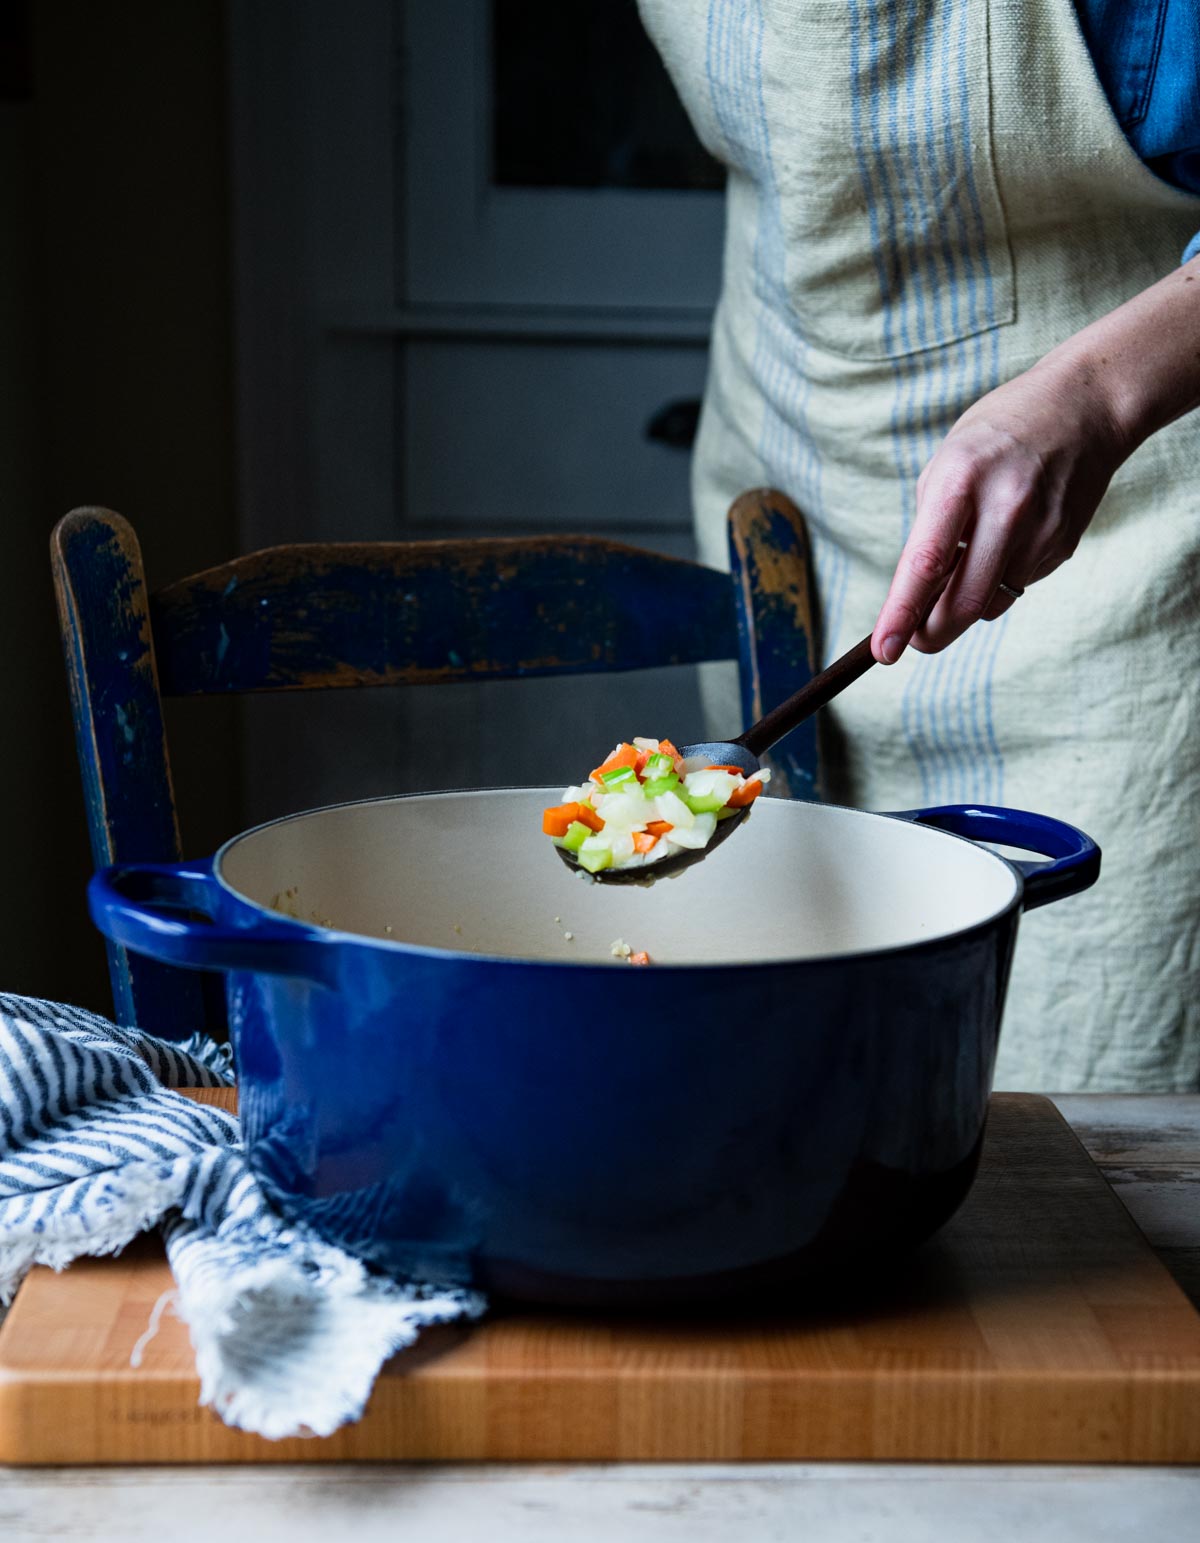 Sauteing vegetables in a blue Dutch oven